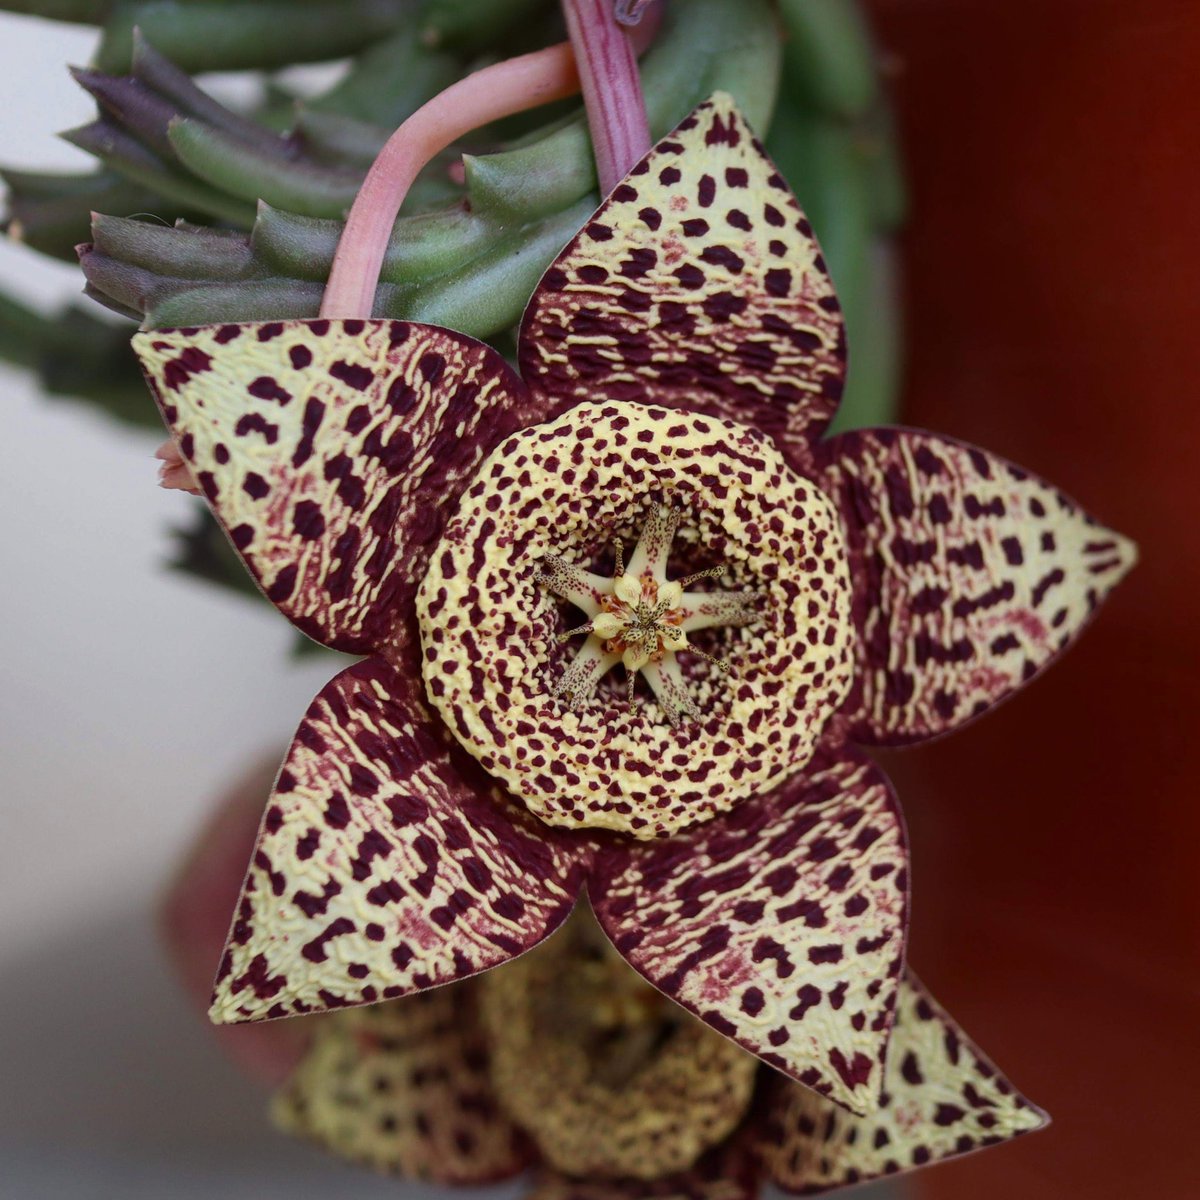 Orbea variegata flower.
Another huge plant left behind by a neighbor...Yes, we will take in ALL your abandoned plants!
#orbea
#stepelia
#succulents
#suckerforsucculents
#ilovesucculents
#succulentslover
#lovesucculents
#flower
#flowerslovers
#blooms
#flowering
#plants
#plant